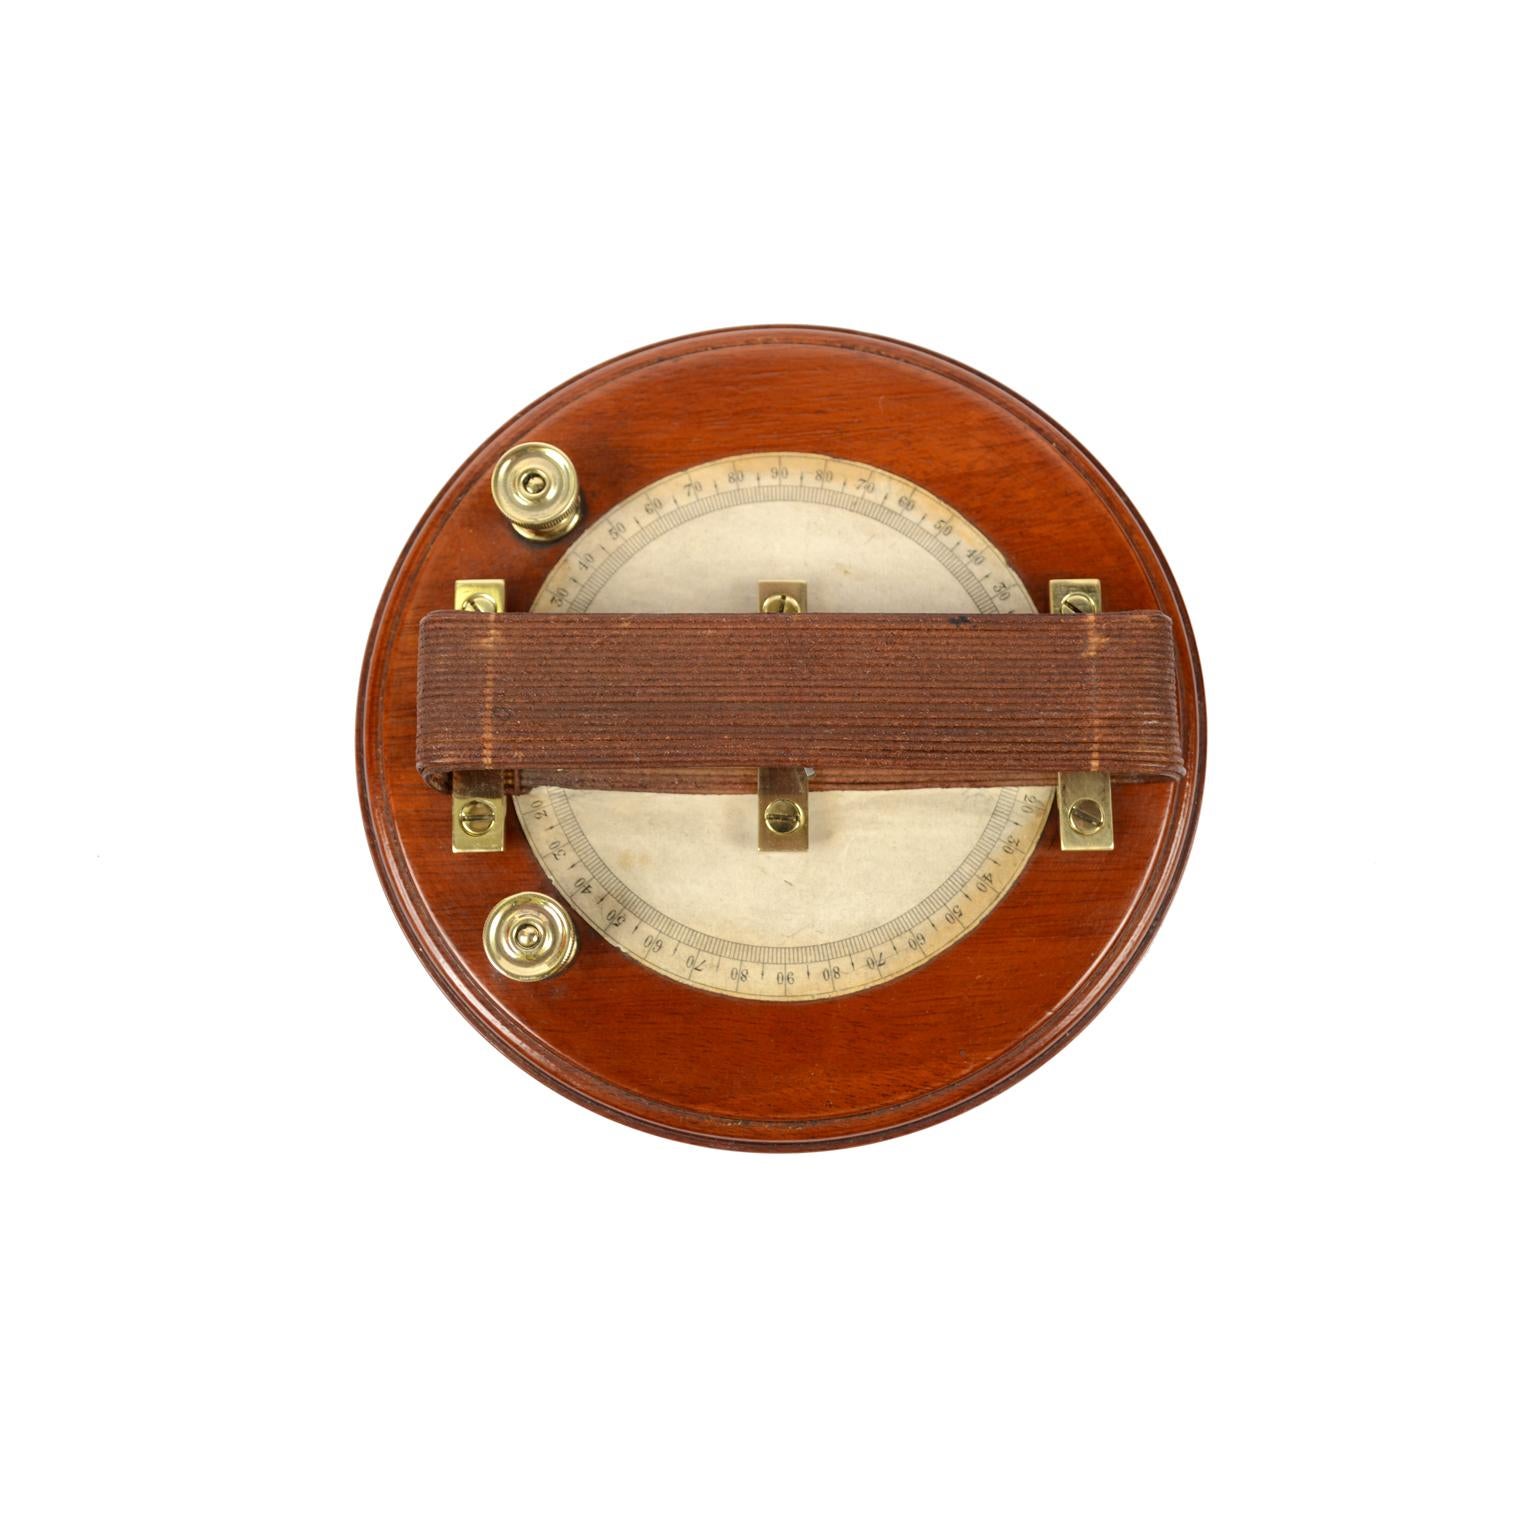 Astatic galvanometer by Elliott of the mid-19th century, mounted on a turned wooden base. It is an instrument used to measure weak currents. The instrument consists of a coil, a graduated scale placed under the circular coil, an astatic system